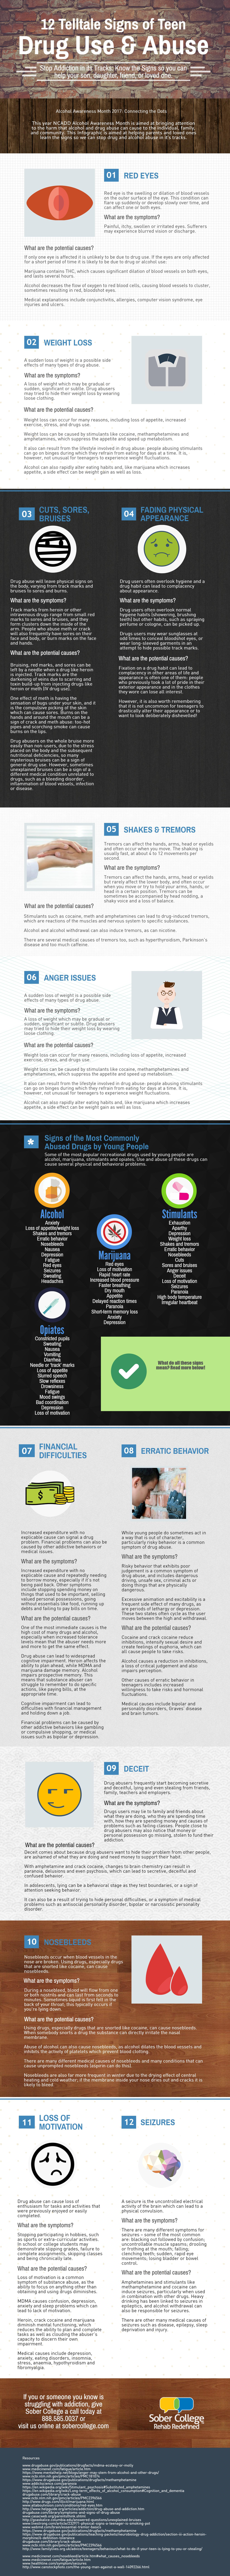 12 Signs of Drug Use and Abuse Infograhic